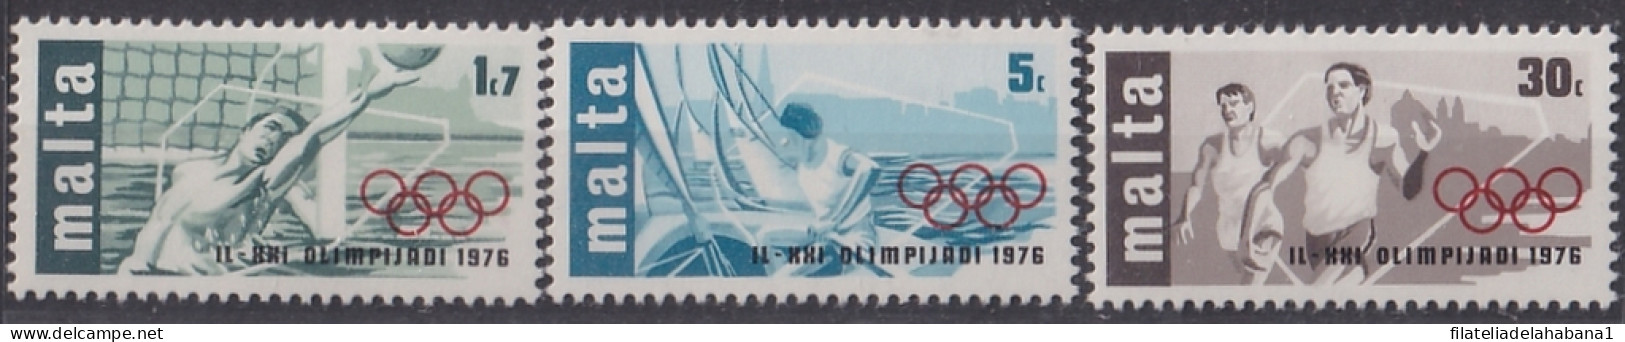 F-EX47597 MALTA MNH 1976 MONTREAL OLYMPIC GAMES ATHLETISM YACHTING WATERPOLO.  - Estate 1976: Montreal